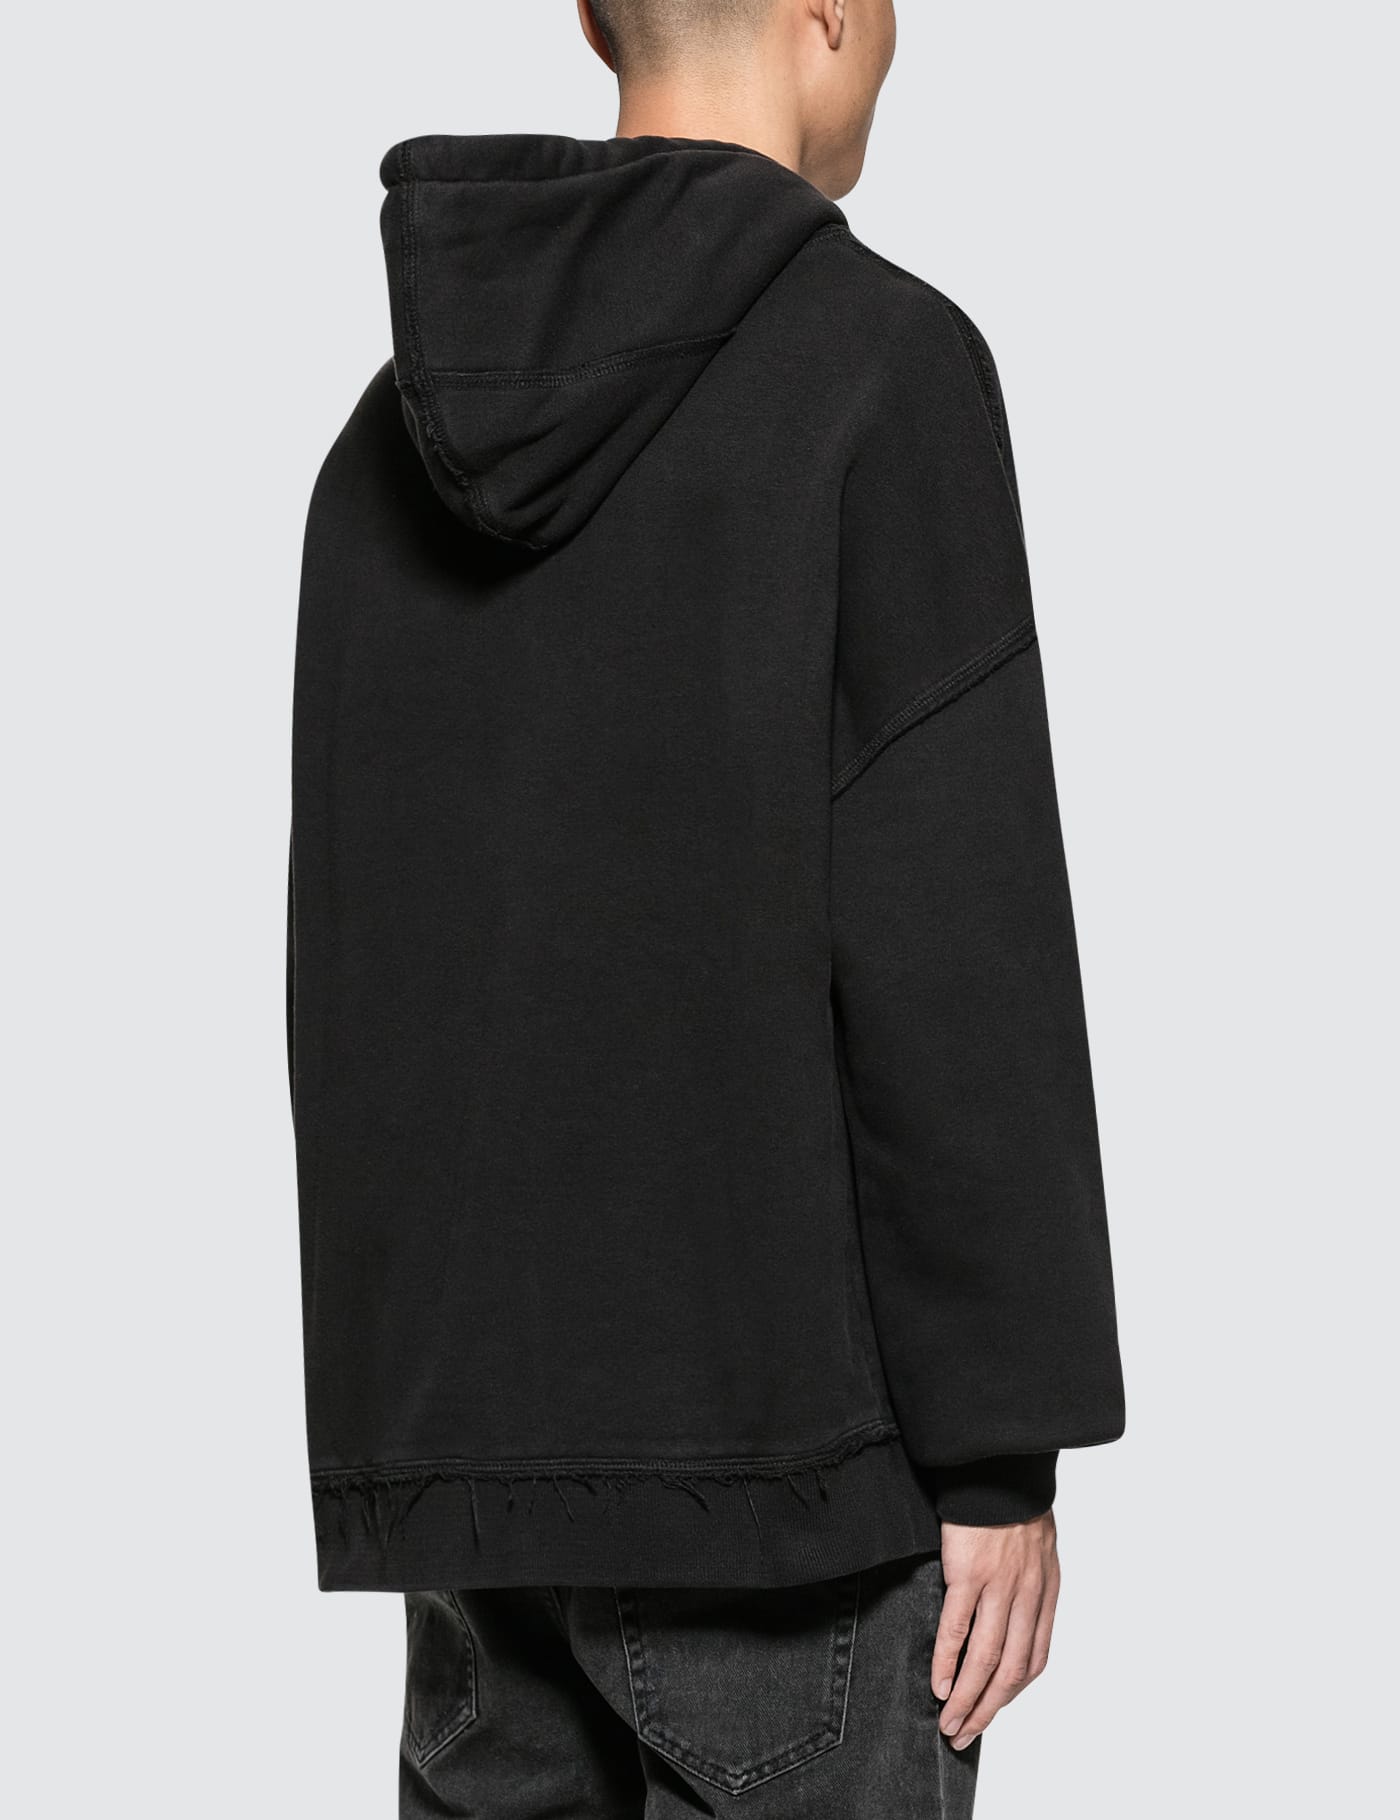 Misbhv - Flame Hoodie | HBX - Globally Curated Fashion and